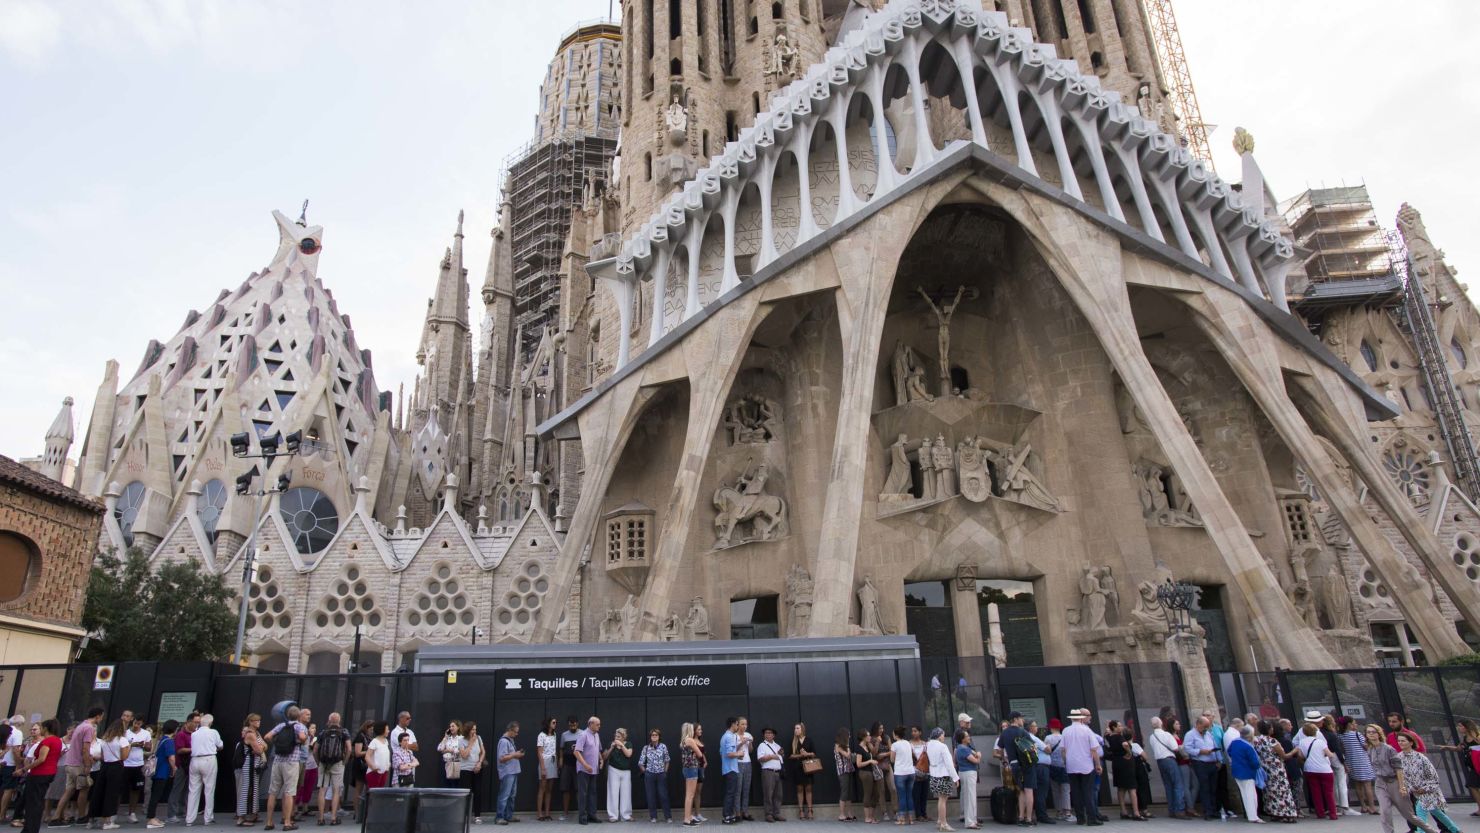 Barcelona's Sagrada Familia cathedral played host to a memorial mass for the victims of the Barcelona attacks.